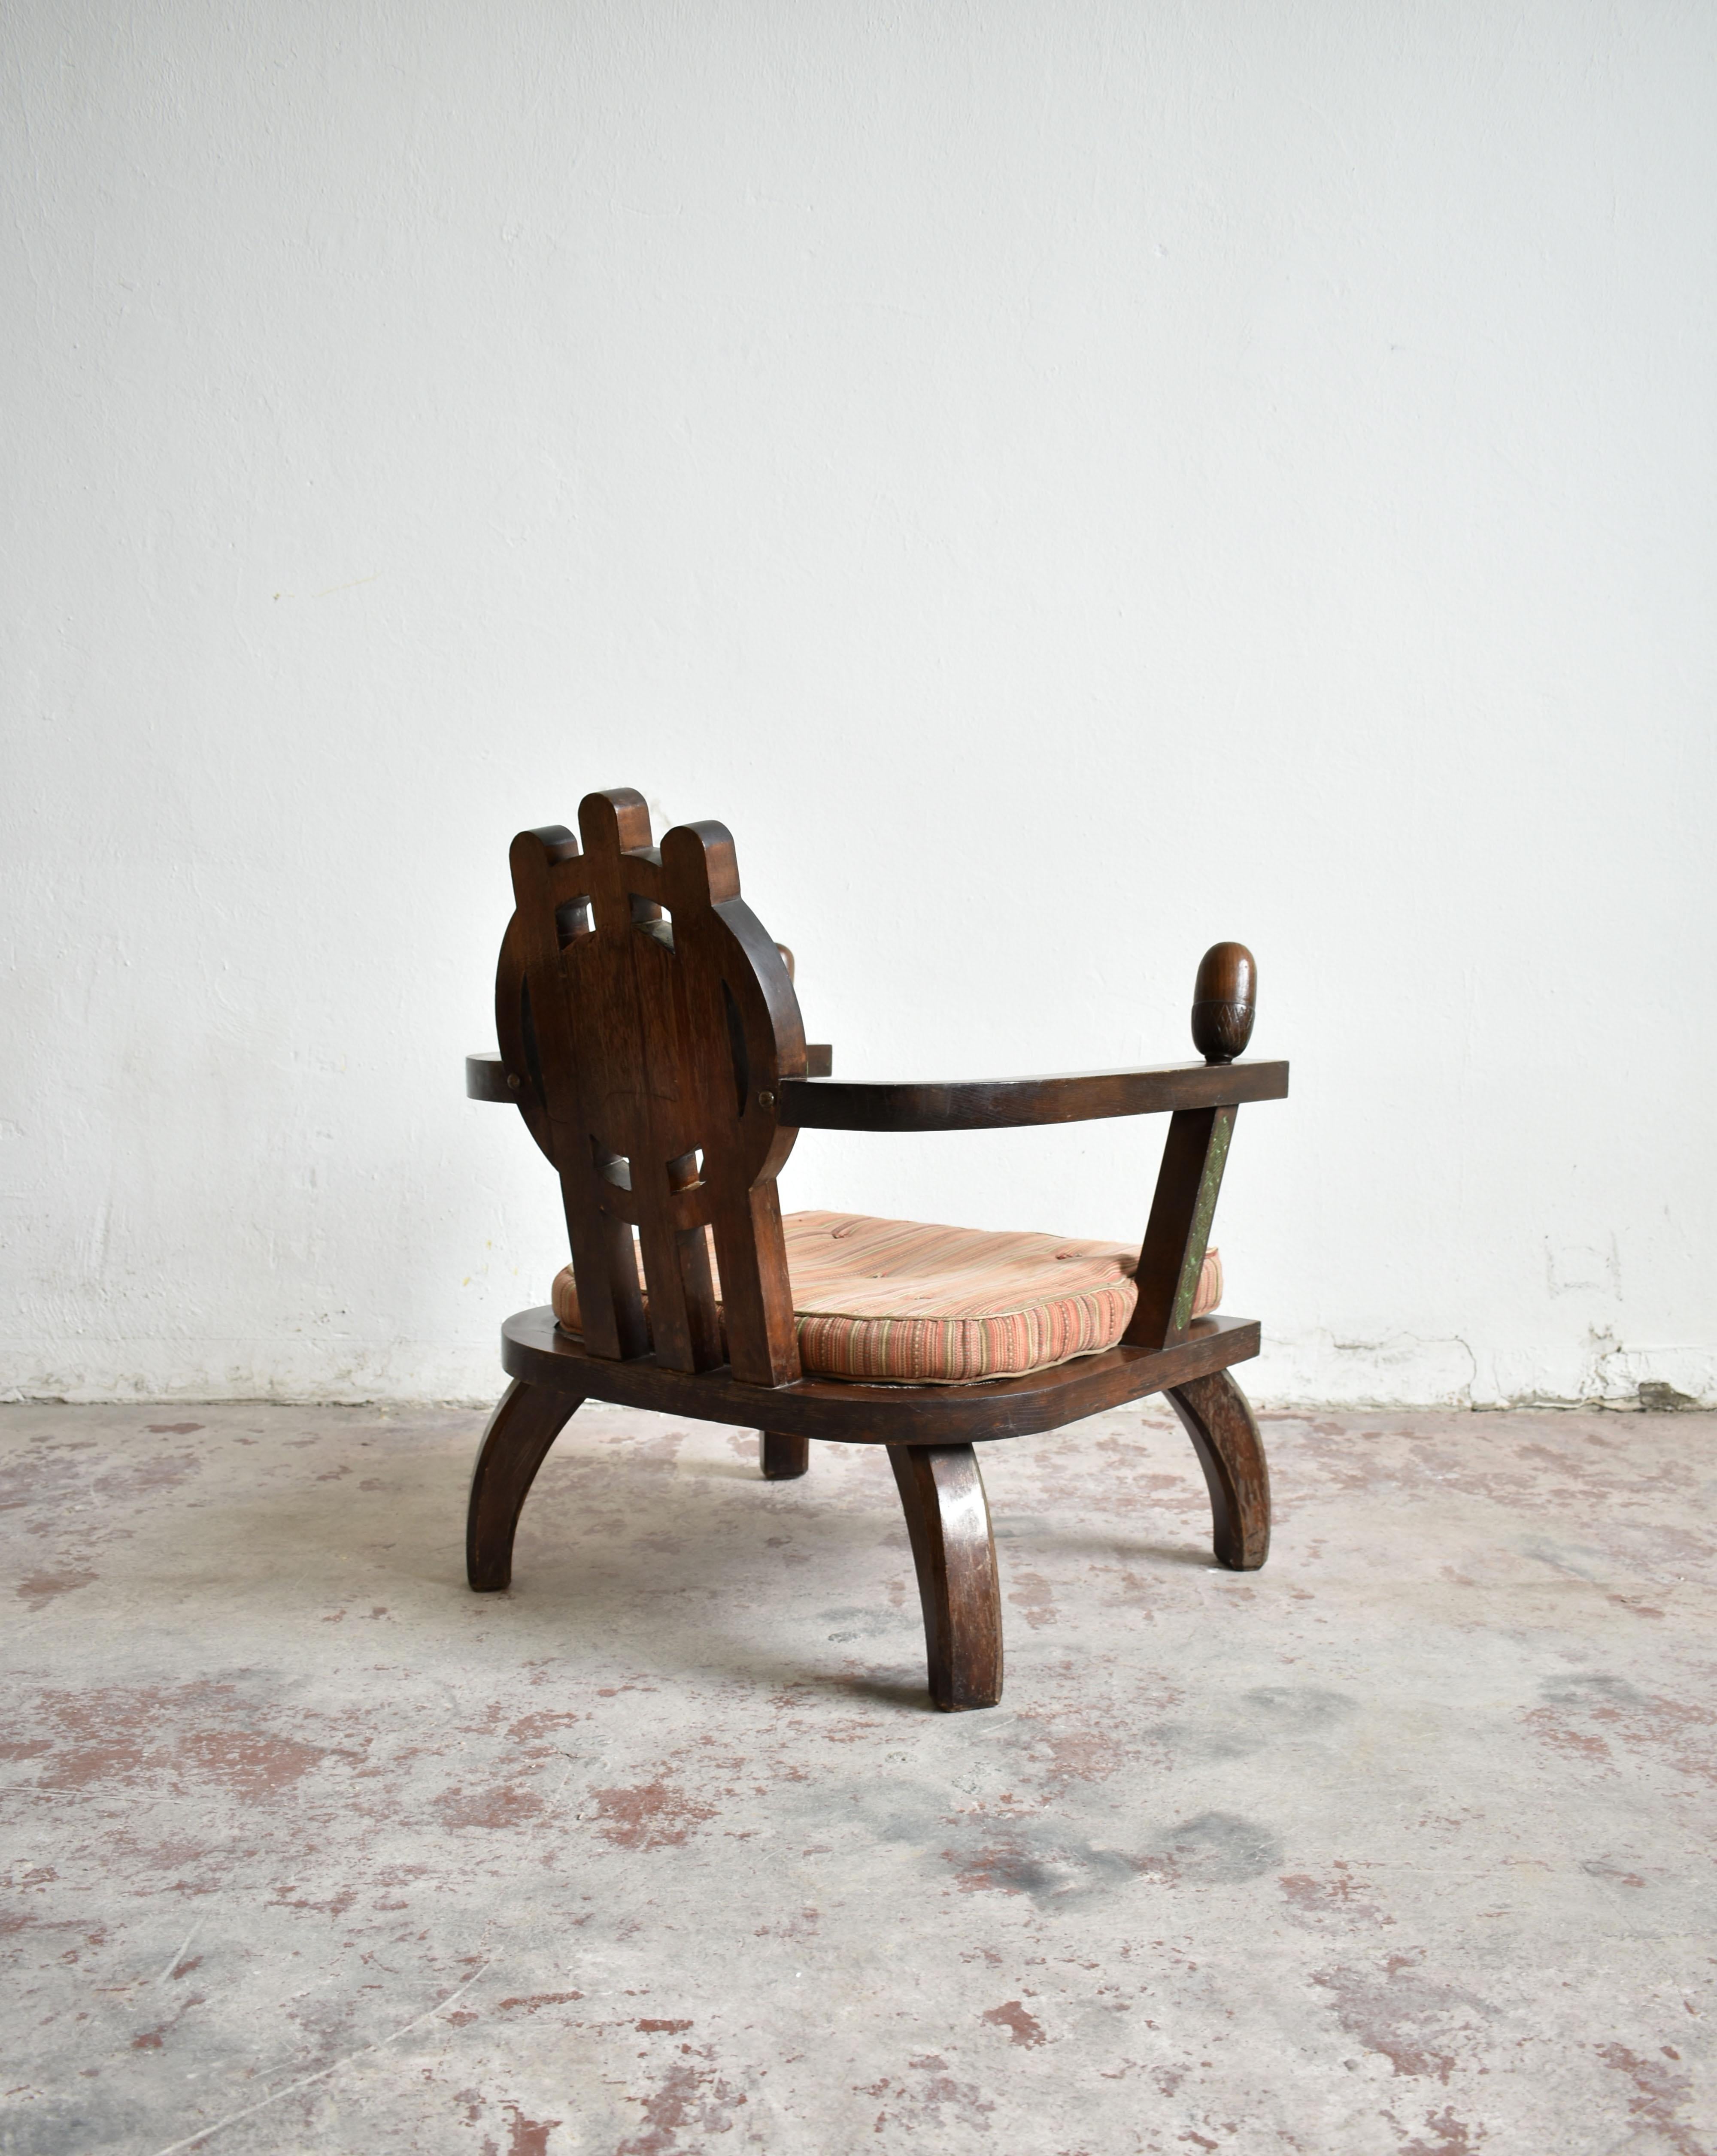 20th Century Lounge Chair by Ettore Zaccari, Oak with Carved Details, Italy, 1910